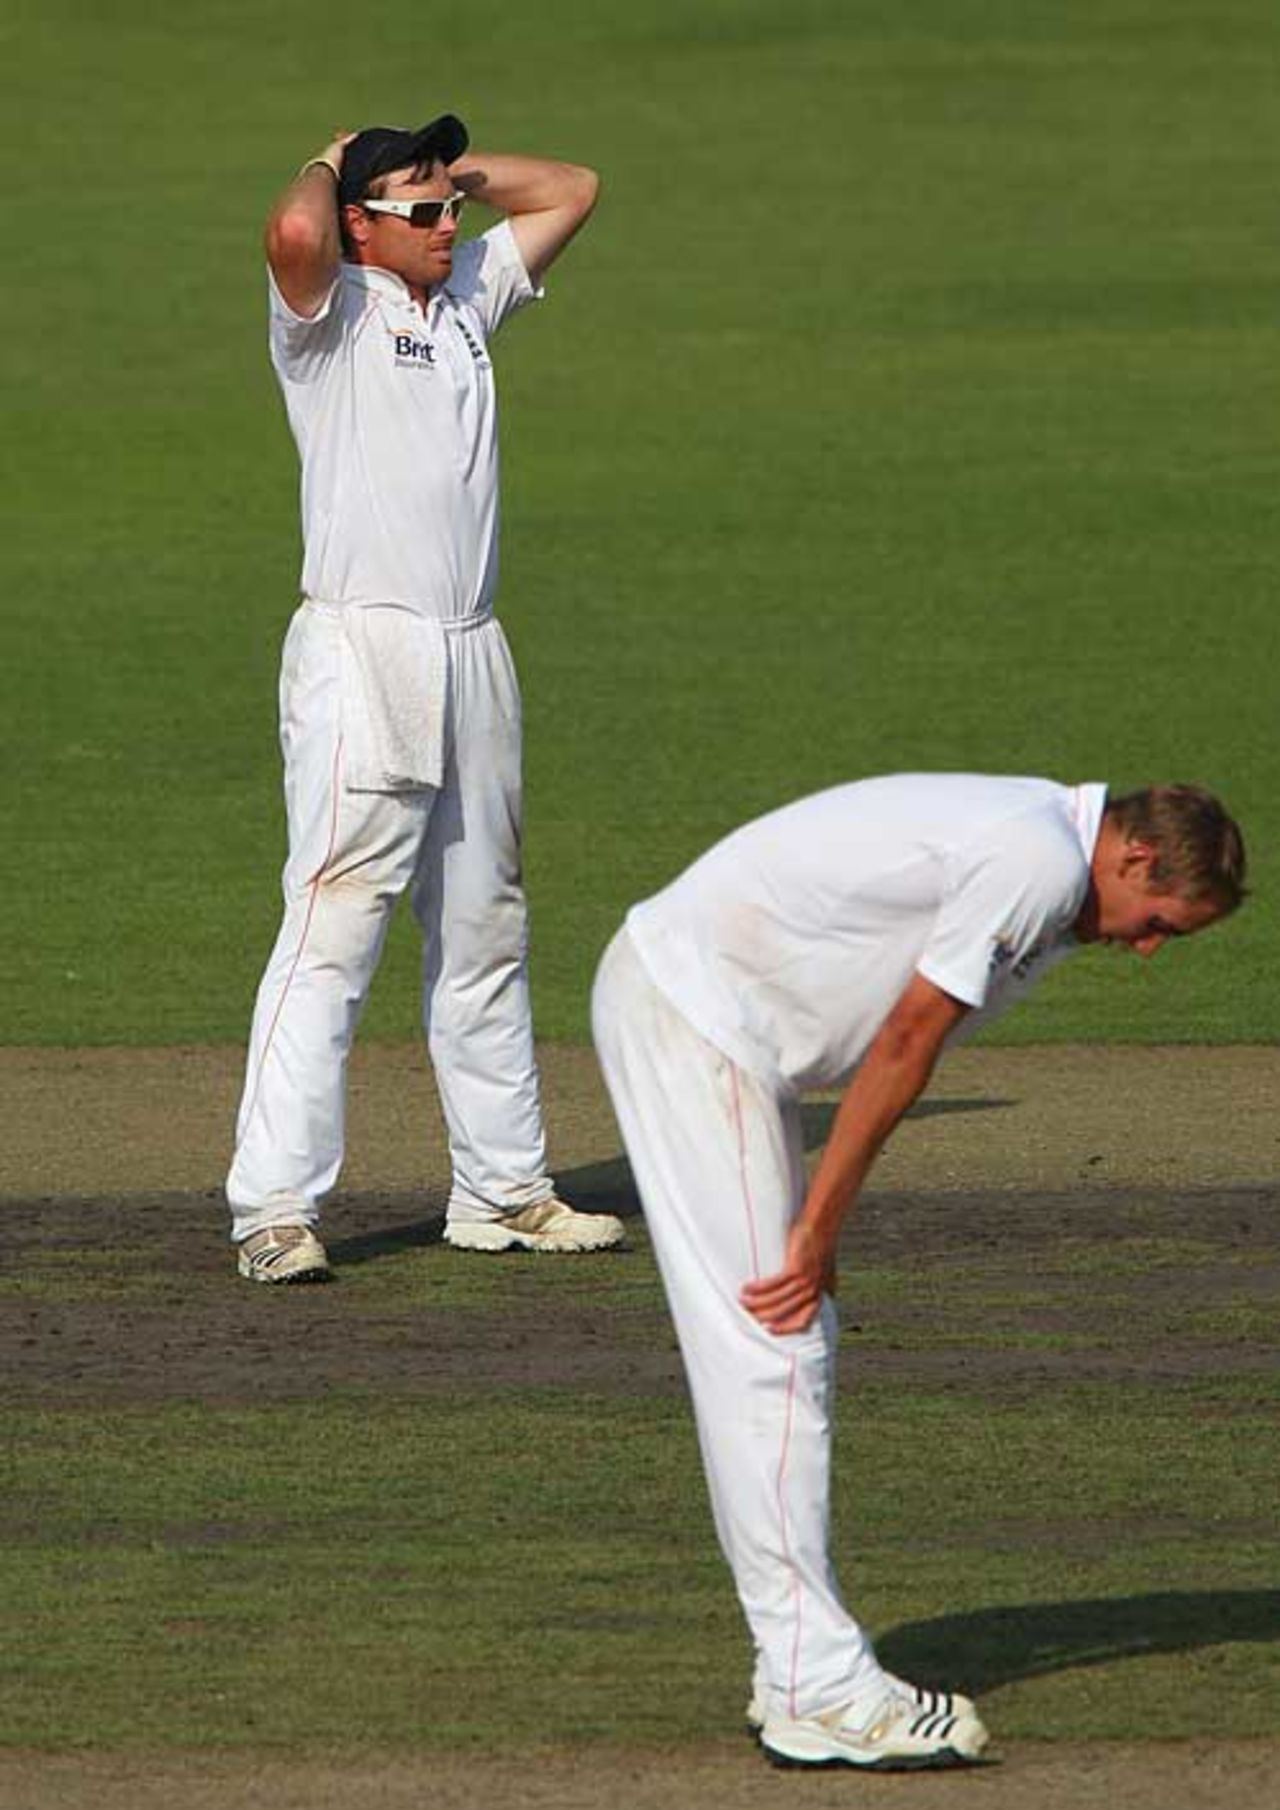 It was another day of hard work for England's quick bowlers, Bangladesh v England, 2nd Test, Dhaka, 1st day, March 20, 2010
